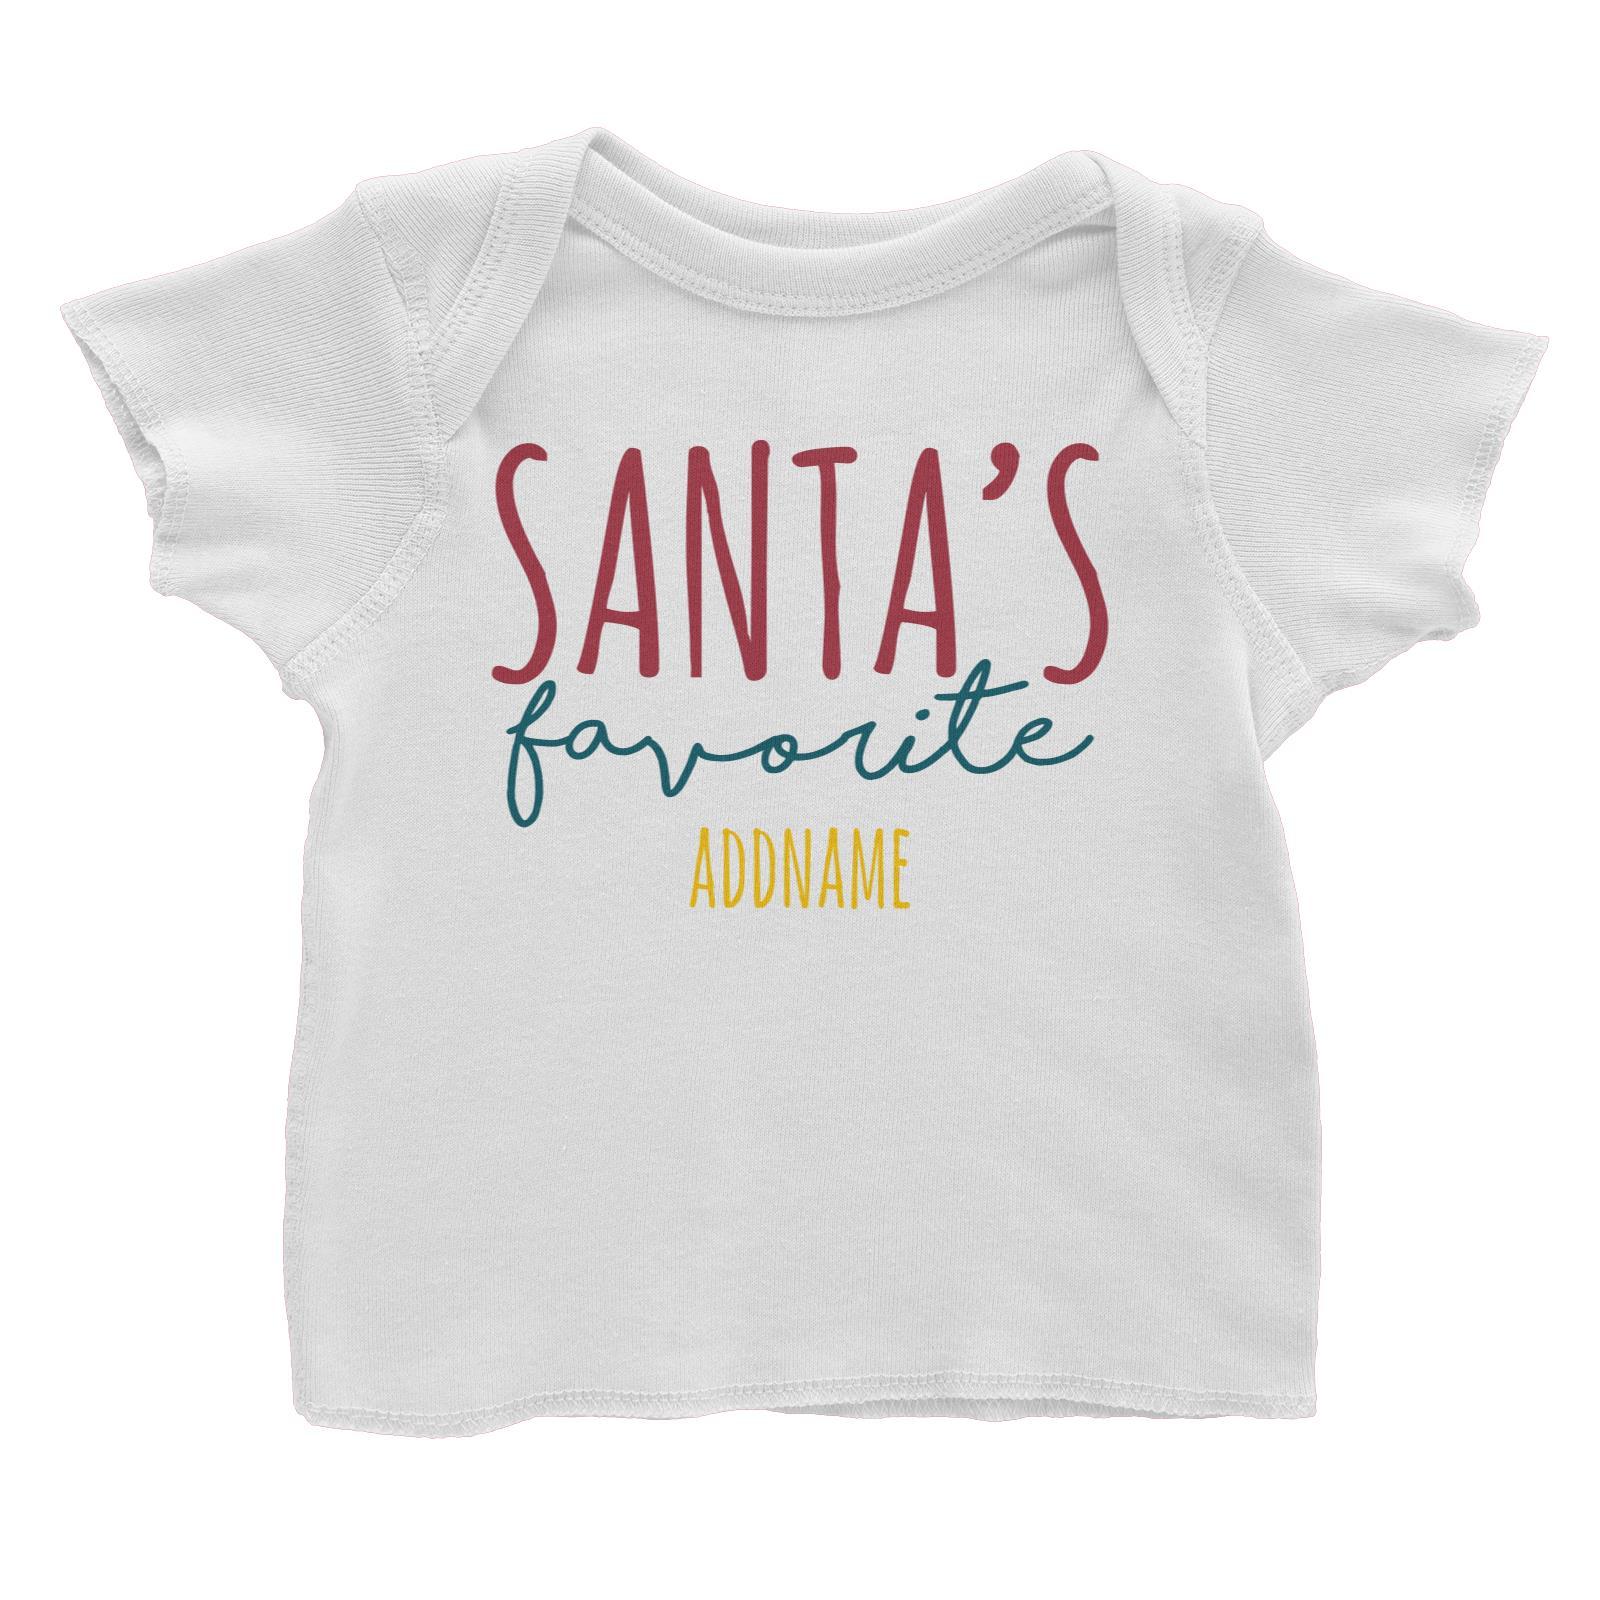 Santa's Favourite Lettering Addname Baby T-Shirt